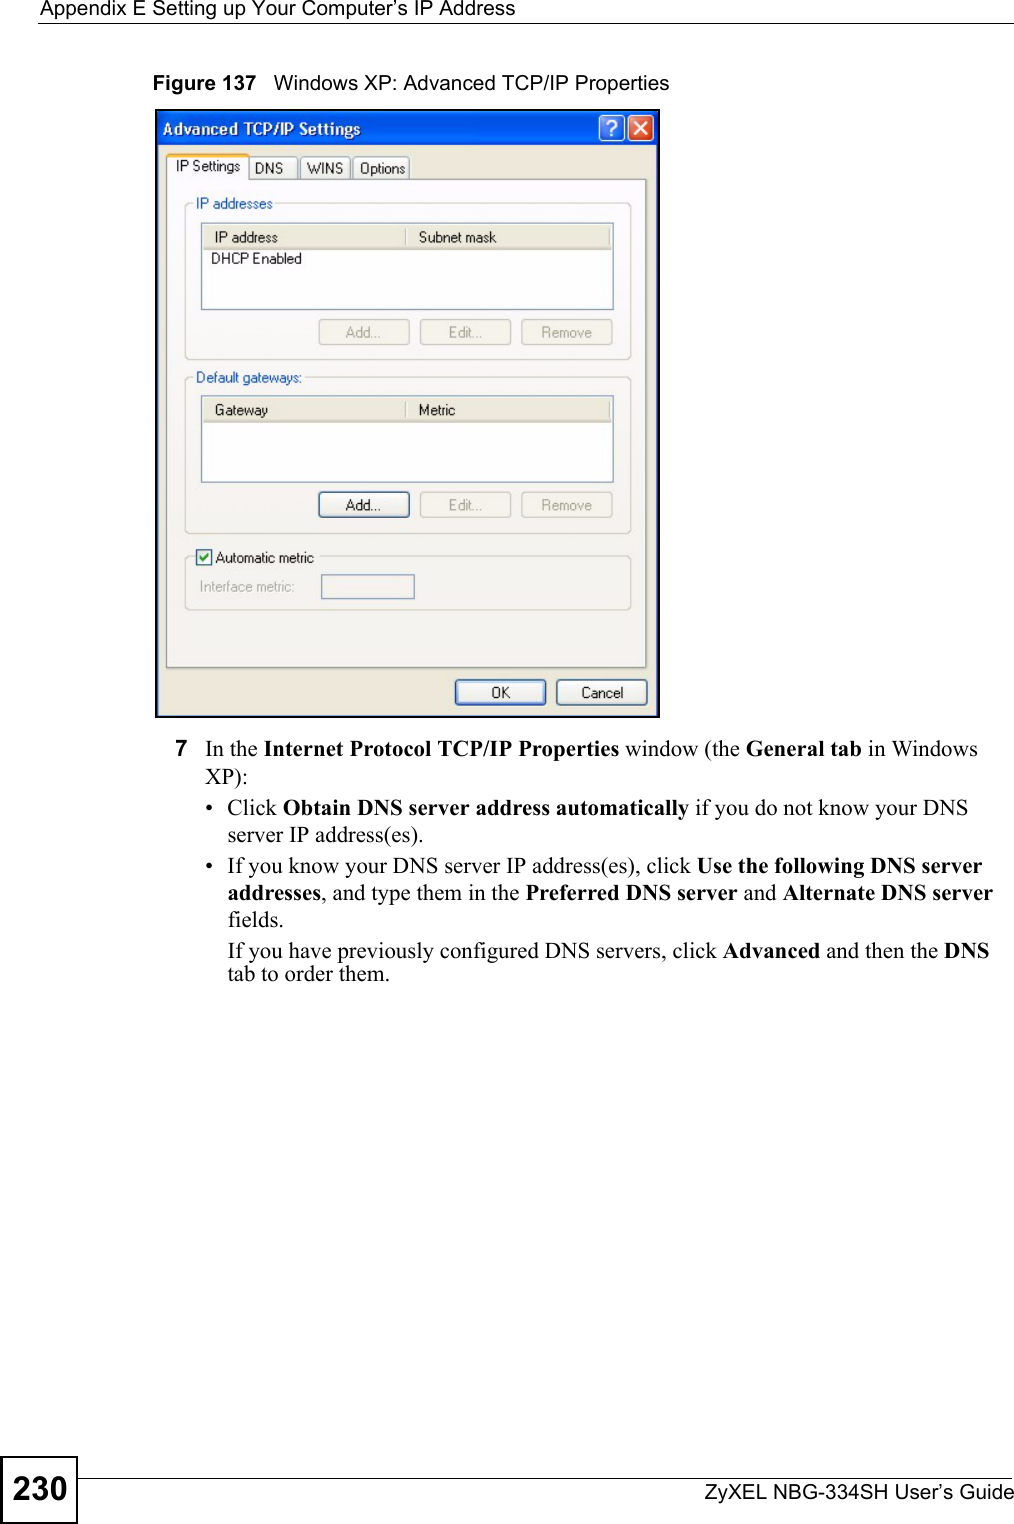 Appendix E Setting up Your Computer’s IP AddressZyXEL NBG-334SH User’s Guide230Figure 137   Windows XP: Advanced TCP/IP Properties7In the Internet Protocol TCP/IP Properties window (the General tab in Windows XP):• Click Obtain DNS server address automatically if you do not know your DNS server IP address(es).• If you know your DNS server IP address(es), click Use the following DNS server addresses, and type them in the Preferred DNS server and Alternate DNS server fields. If you have previously configured DNS servers, click Advanced and then the DNS tab to order them.